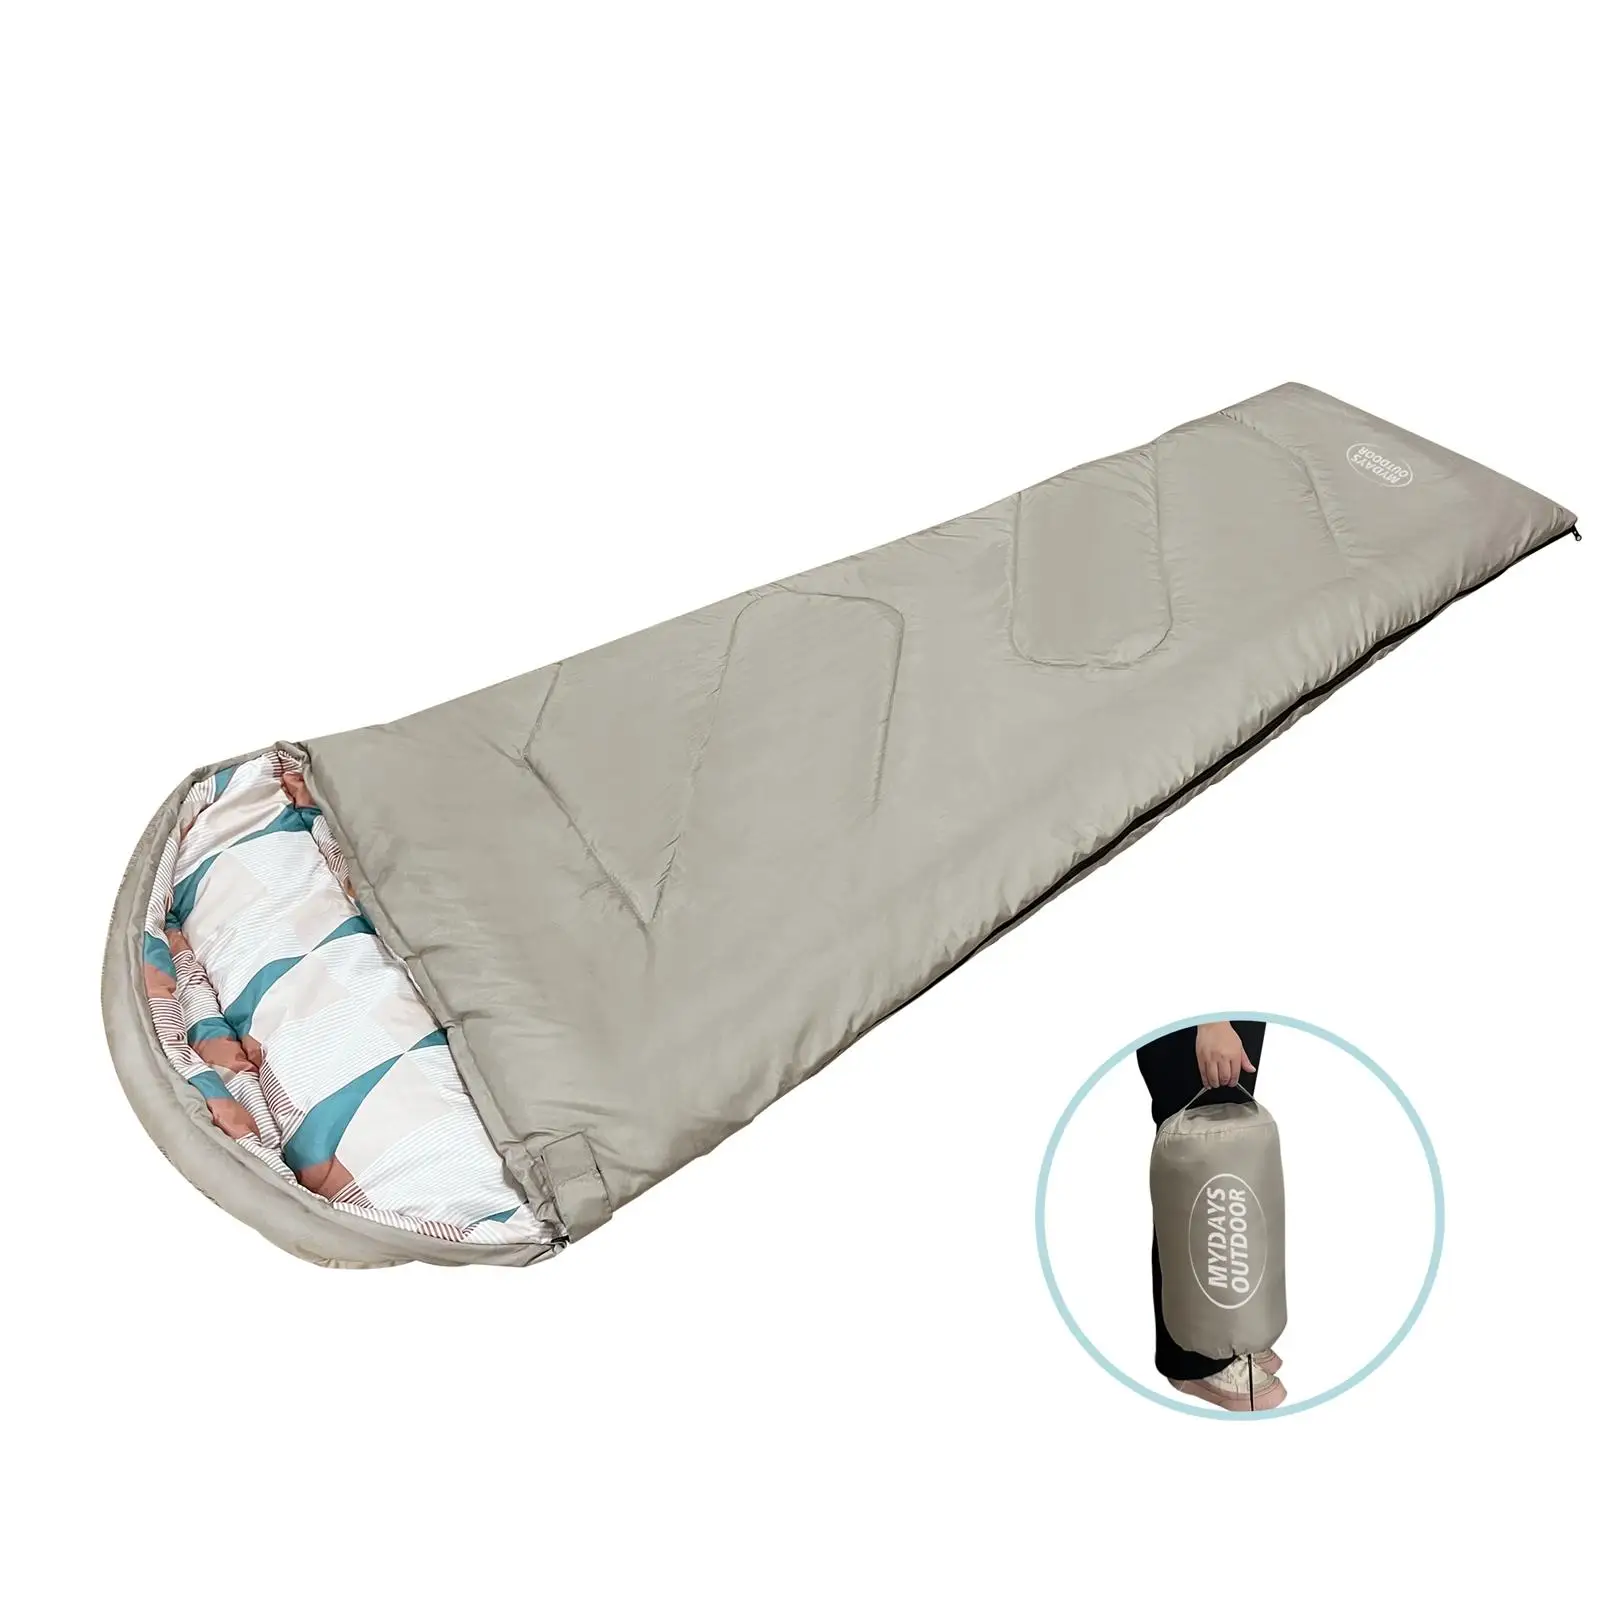 Portable Sleeping bag Warm Survival Thermal Comfortable Polyester for Women Cold Weather Hiking Mountaineering Camping